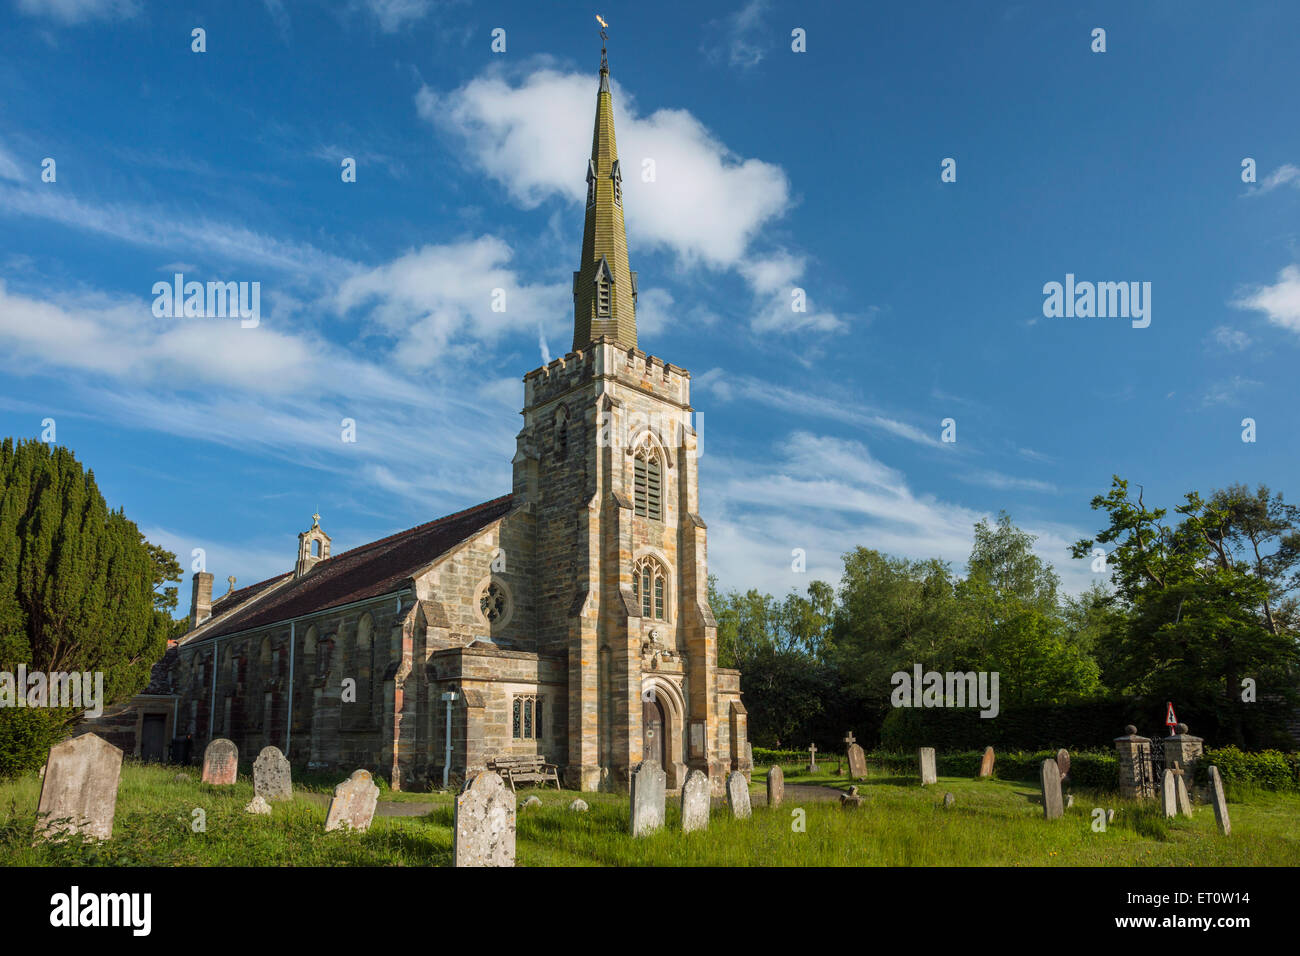 St Mark's Church in Hadlow Down, East Sussex, Angleterre. Banque D'Images